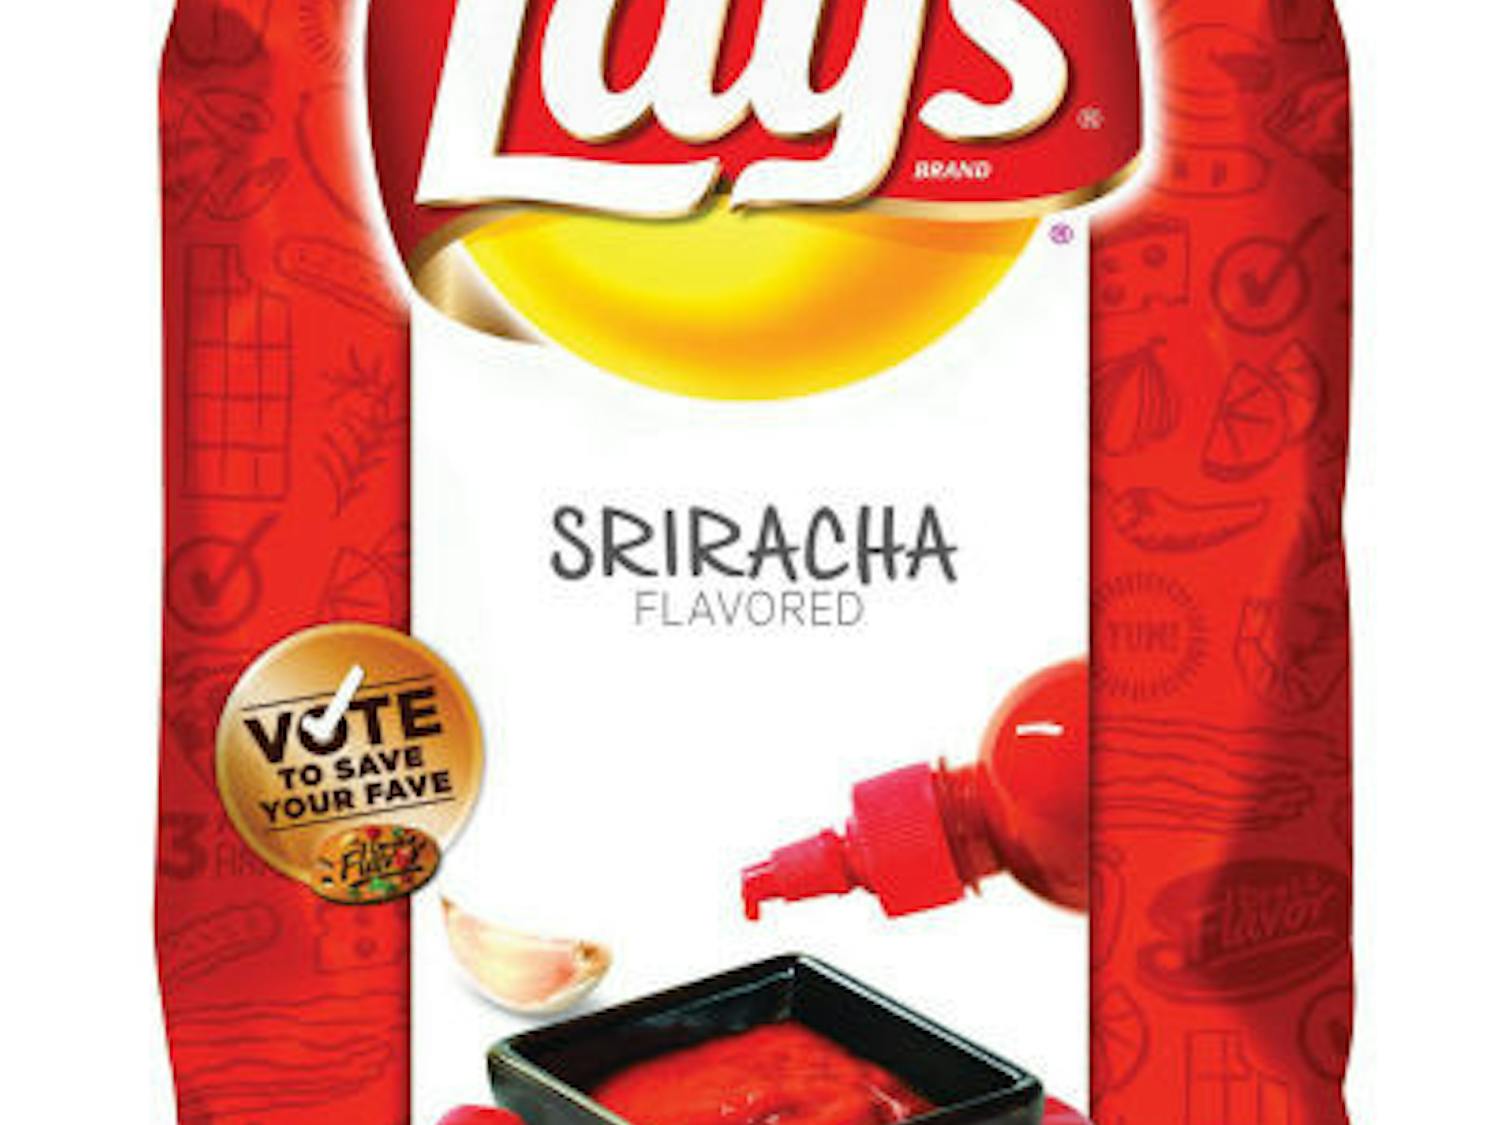 This product photo provided by Lay's shows a bag of their Thai-inspired Sriracha flavored potato chips. The new flavor, along with two others - Cheesy Garlic Bread and Chicken &amp; Waffles - will be sold at retailers nationwide starting in mid-February 2013. After trying them, fans have until May to vote for their favorite. The flavor with the most votes in May will stay on store shelves. The other two will be discontinued. (AP Photo/Lay's)